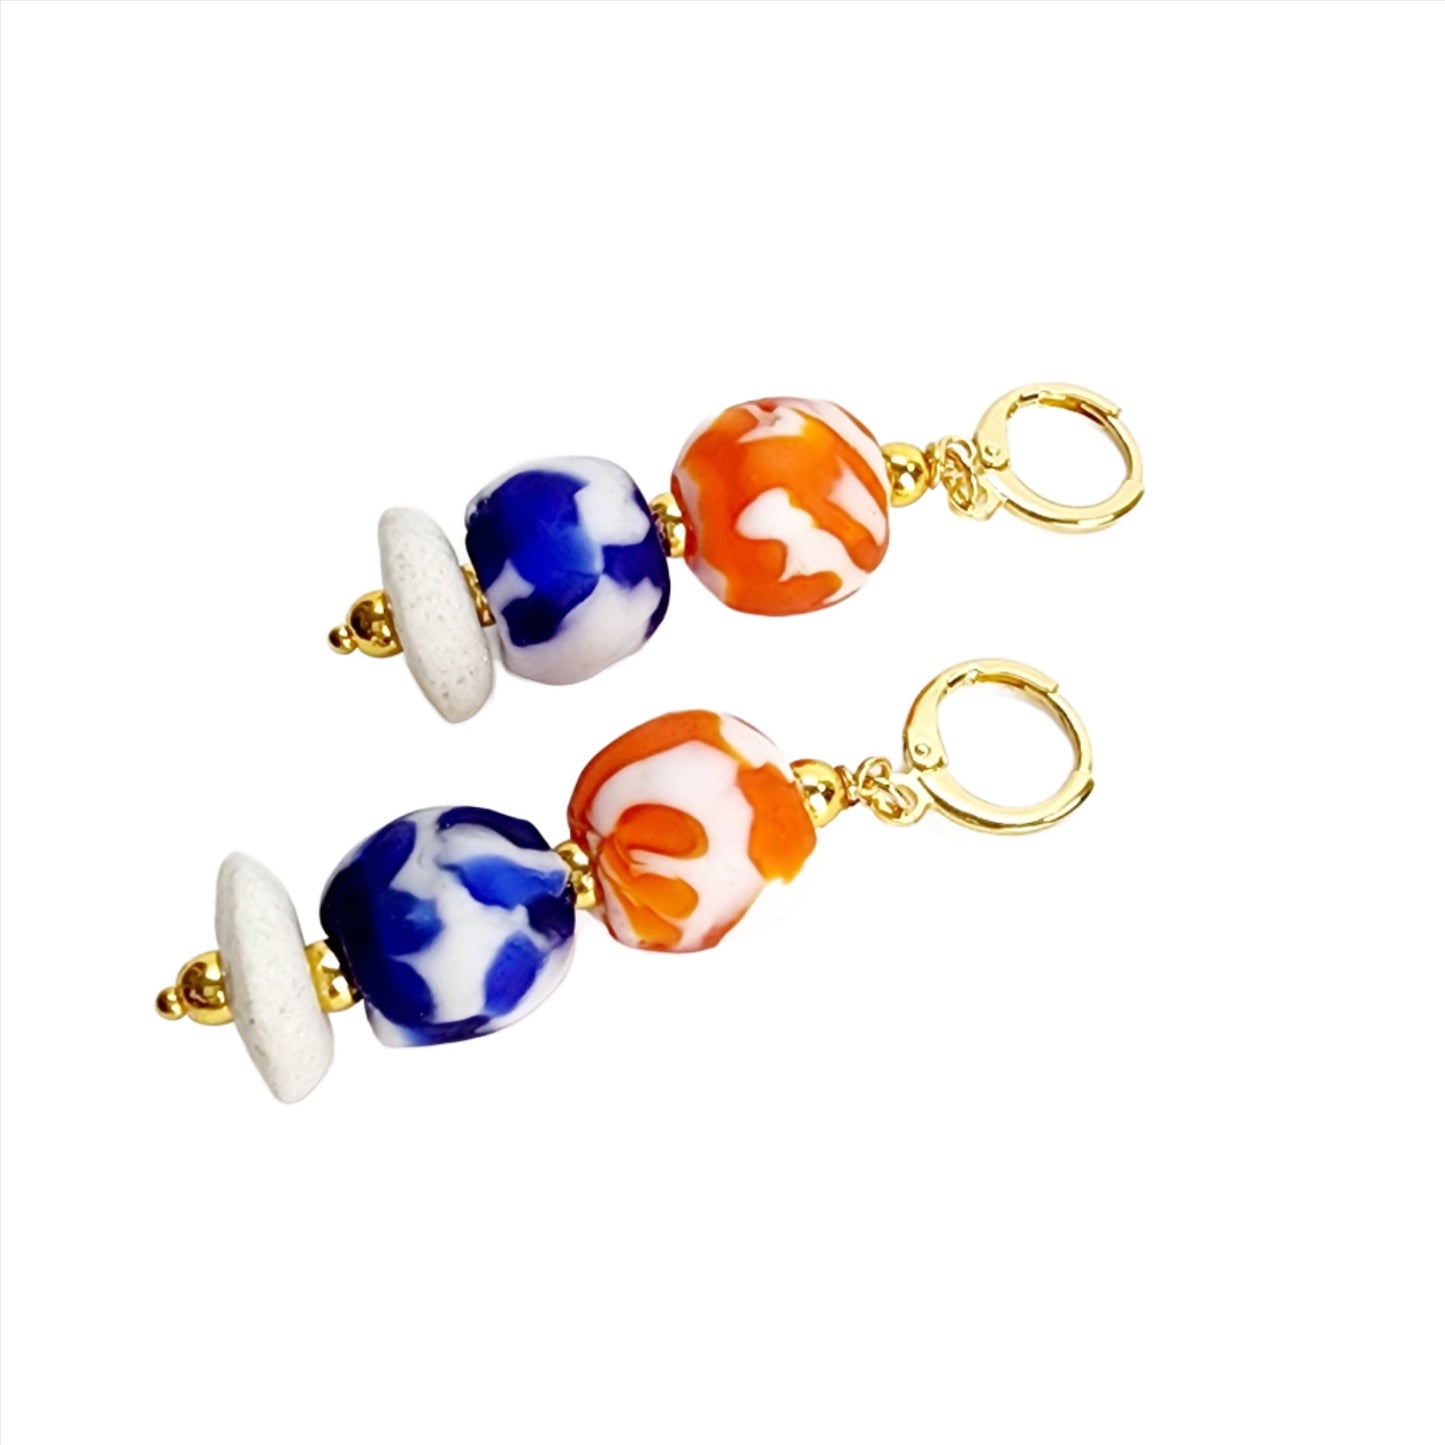 BLUE AND ORANGE HAPPINESS - STATEMENT EARRINGS